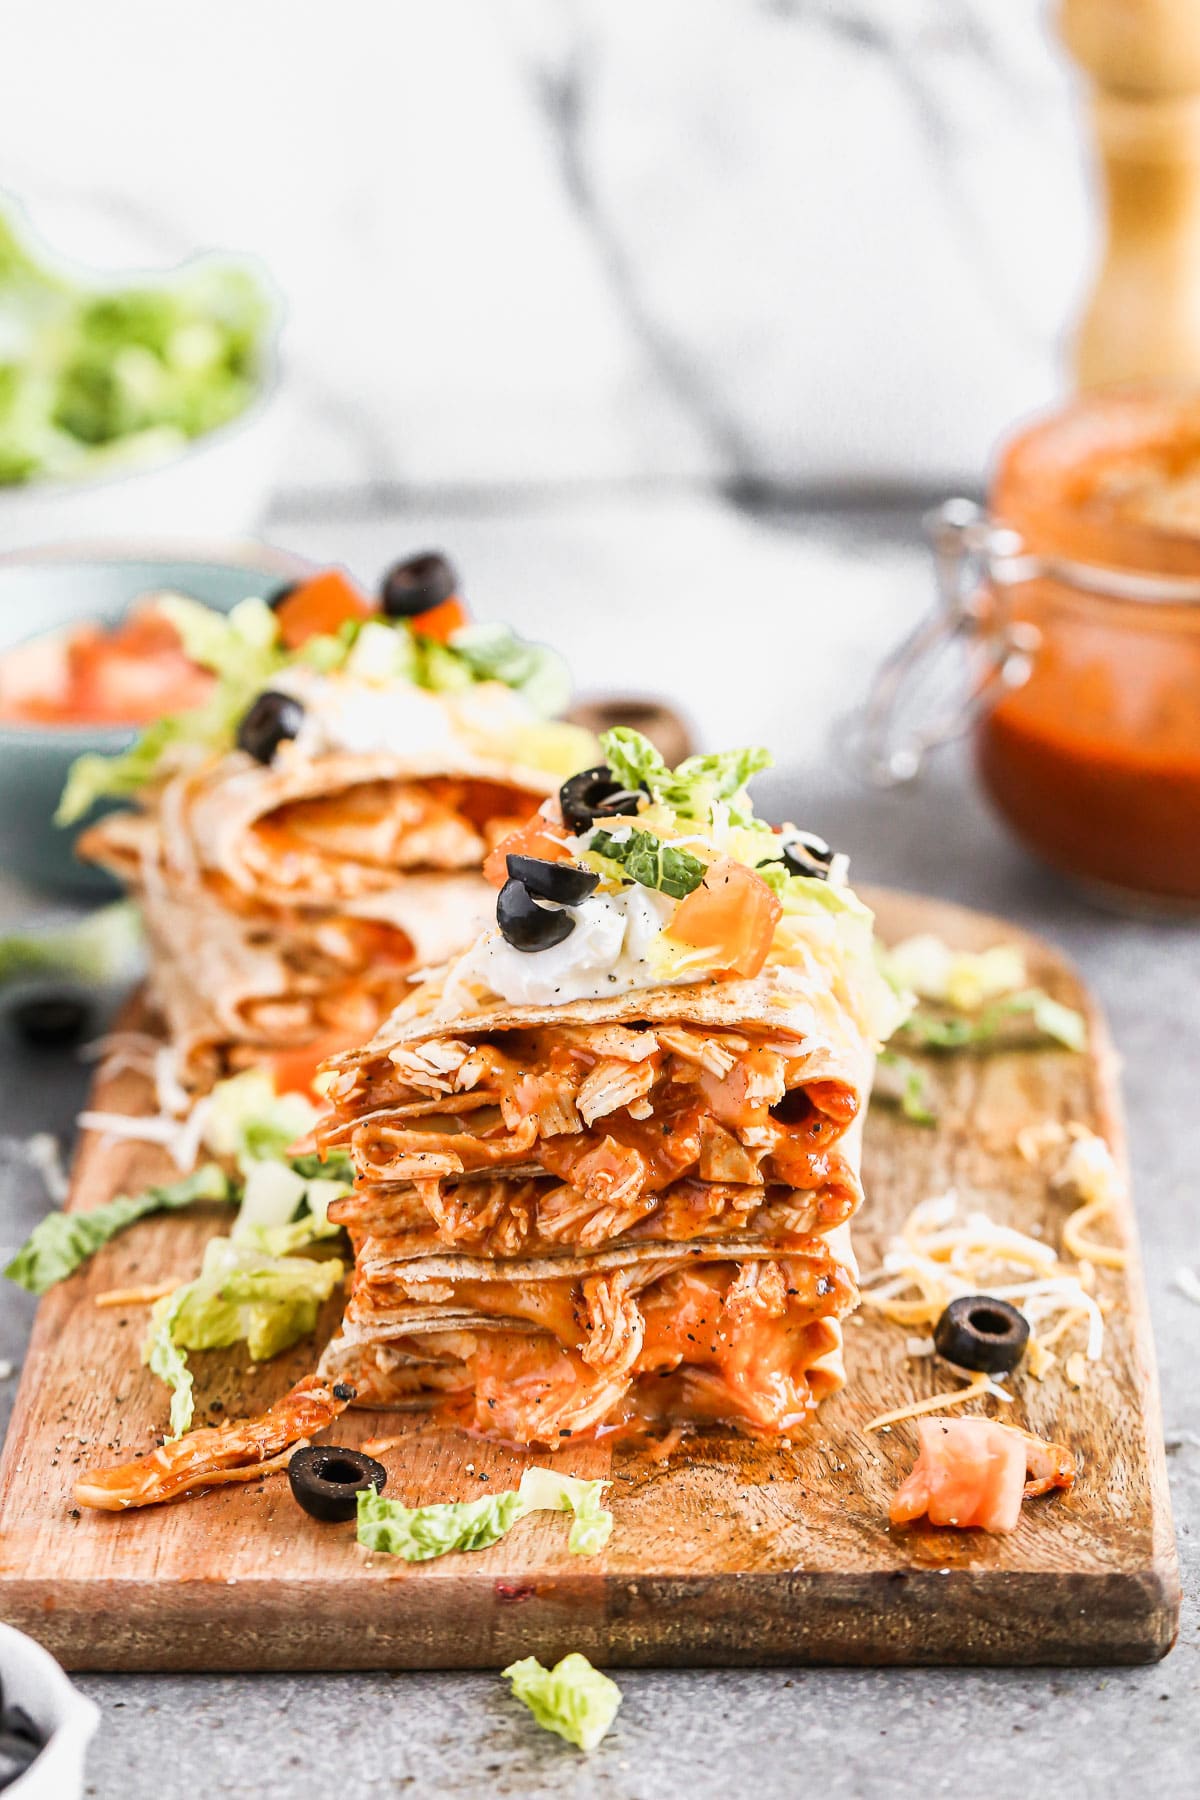 Chicken&nbsp;enchilada on the inside, taco on the outside is what makes our&nbsp;Chicken Enchilada Taco Quesadillas&nbsp;the&nbsp;perfect&nbsp;handheld hybrid of three classic tex-mex dishes. Each whole-wheat tortilla is filled with saucy shredded chicken (made with our epic homemade enchilada sauce) and cheese, pan-fried and then smothered with all your favorite taco fixings!&nbsp;